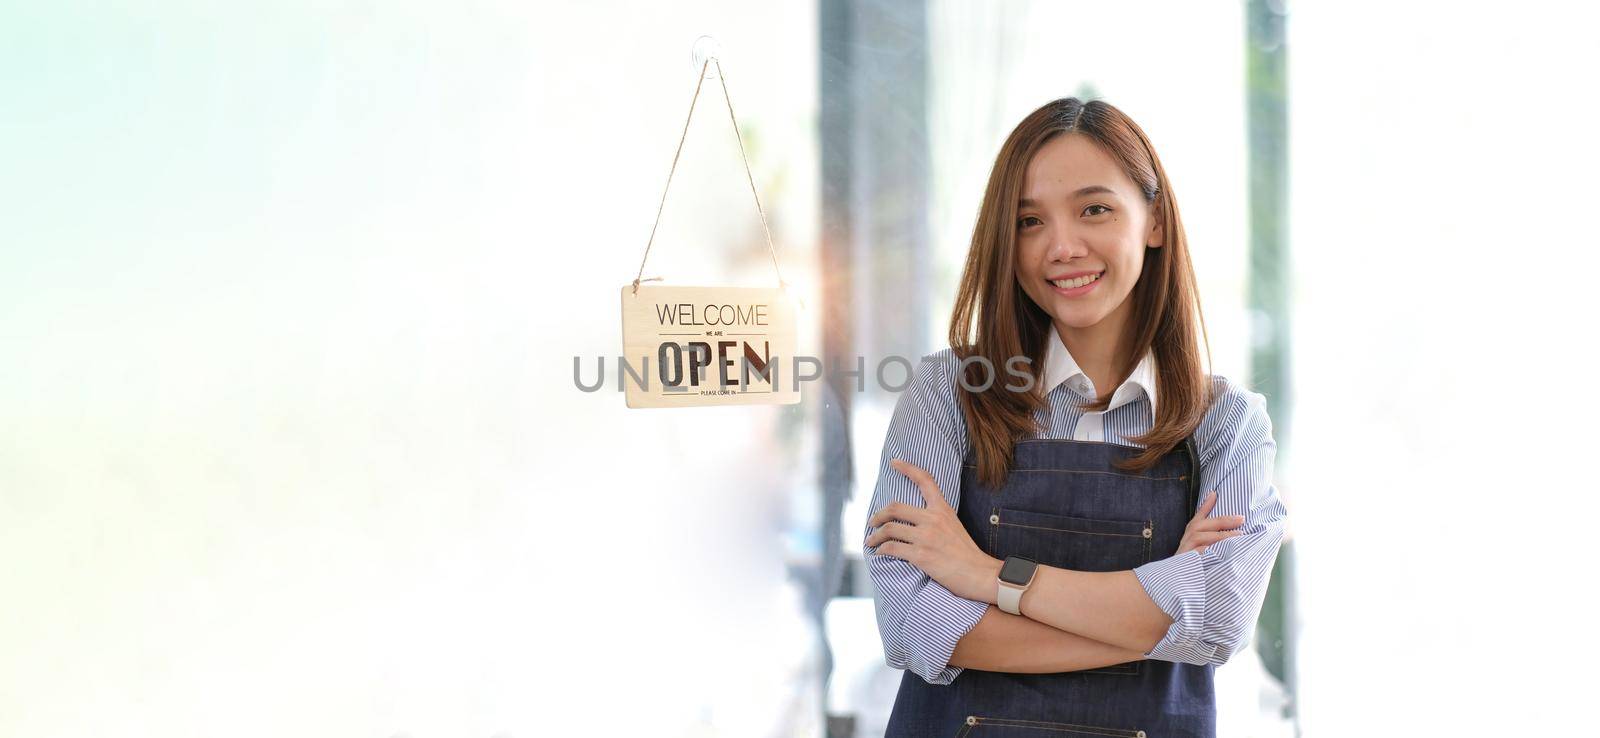 Startup successful small business owner sme beauty girl stand with tablet smartphone in coffee shop restaurant. Portrait of asian tan woman barista cafe owner. SME entrepreneur seller business concept.